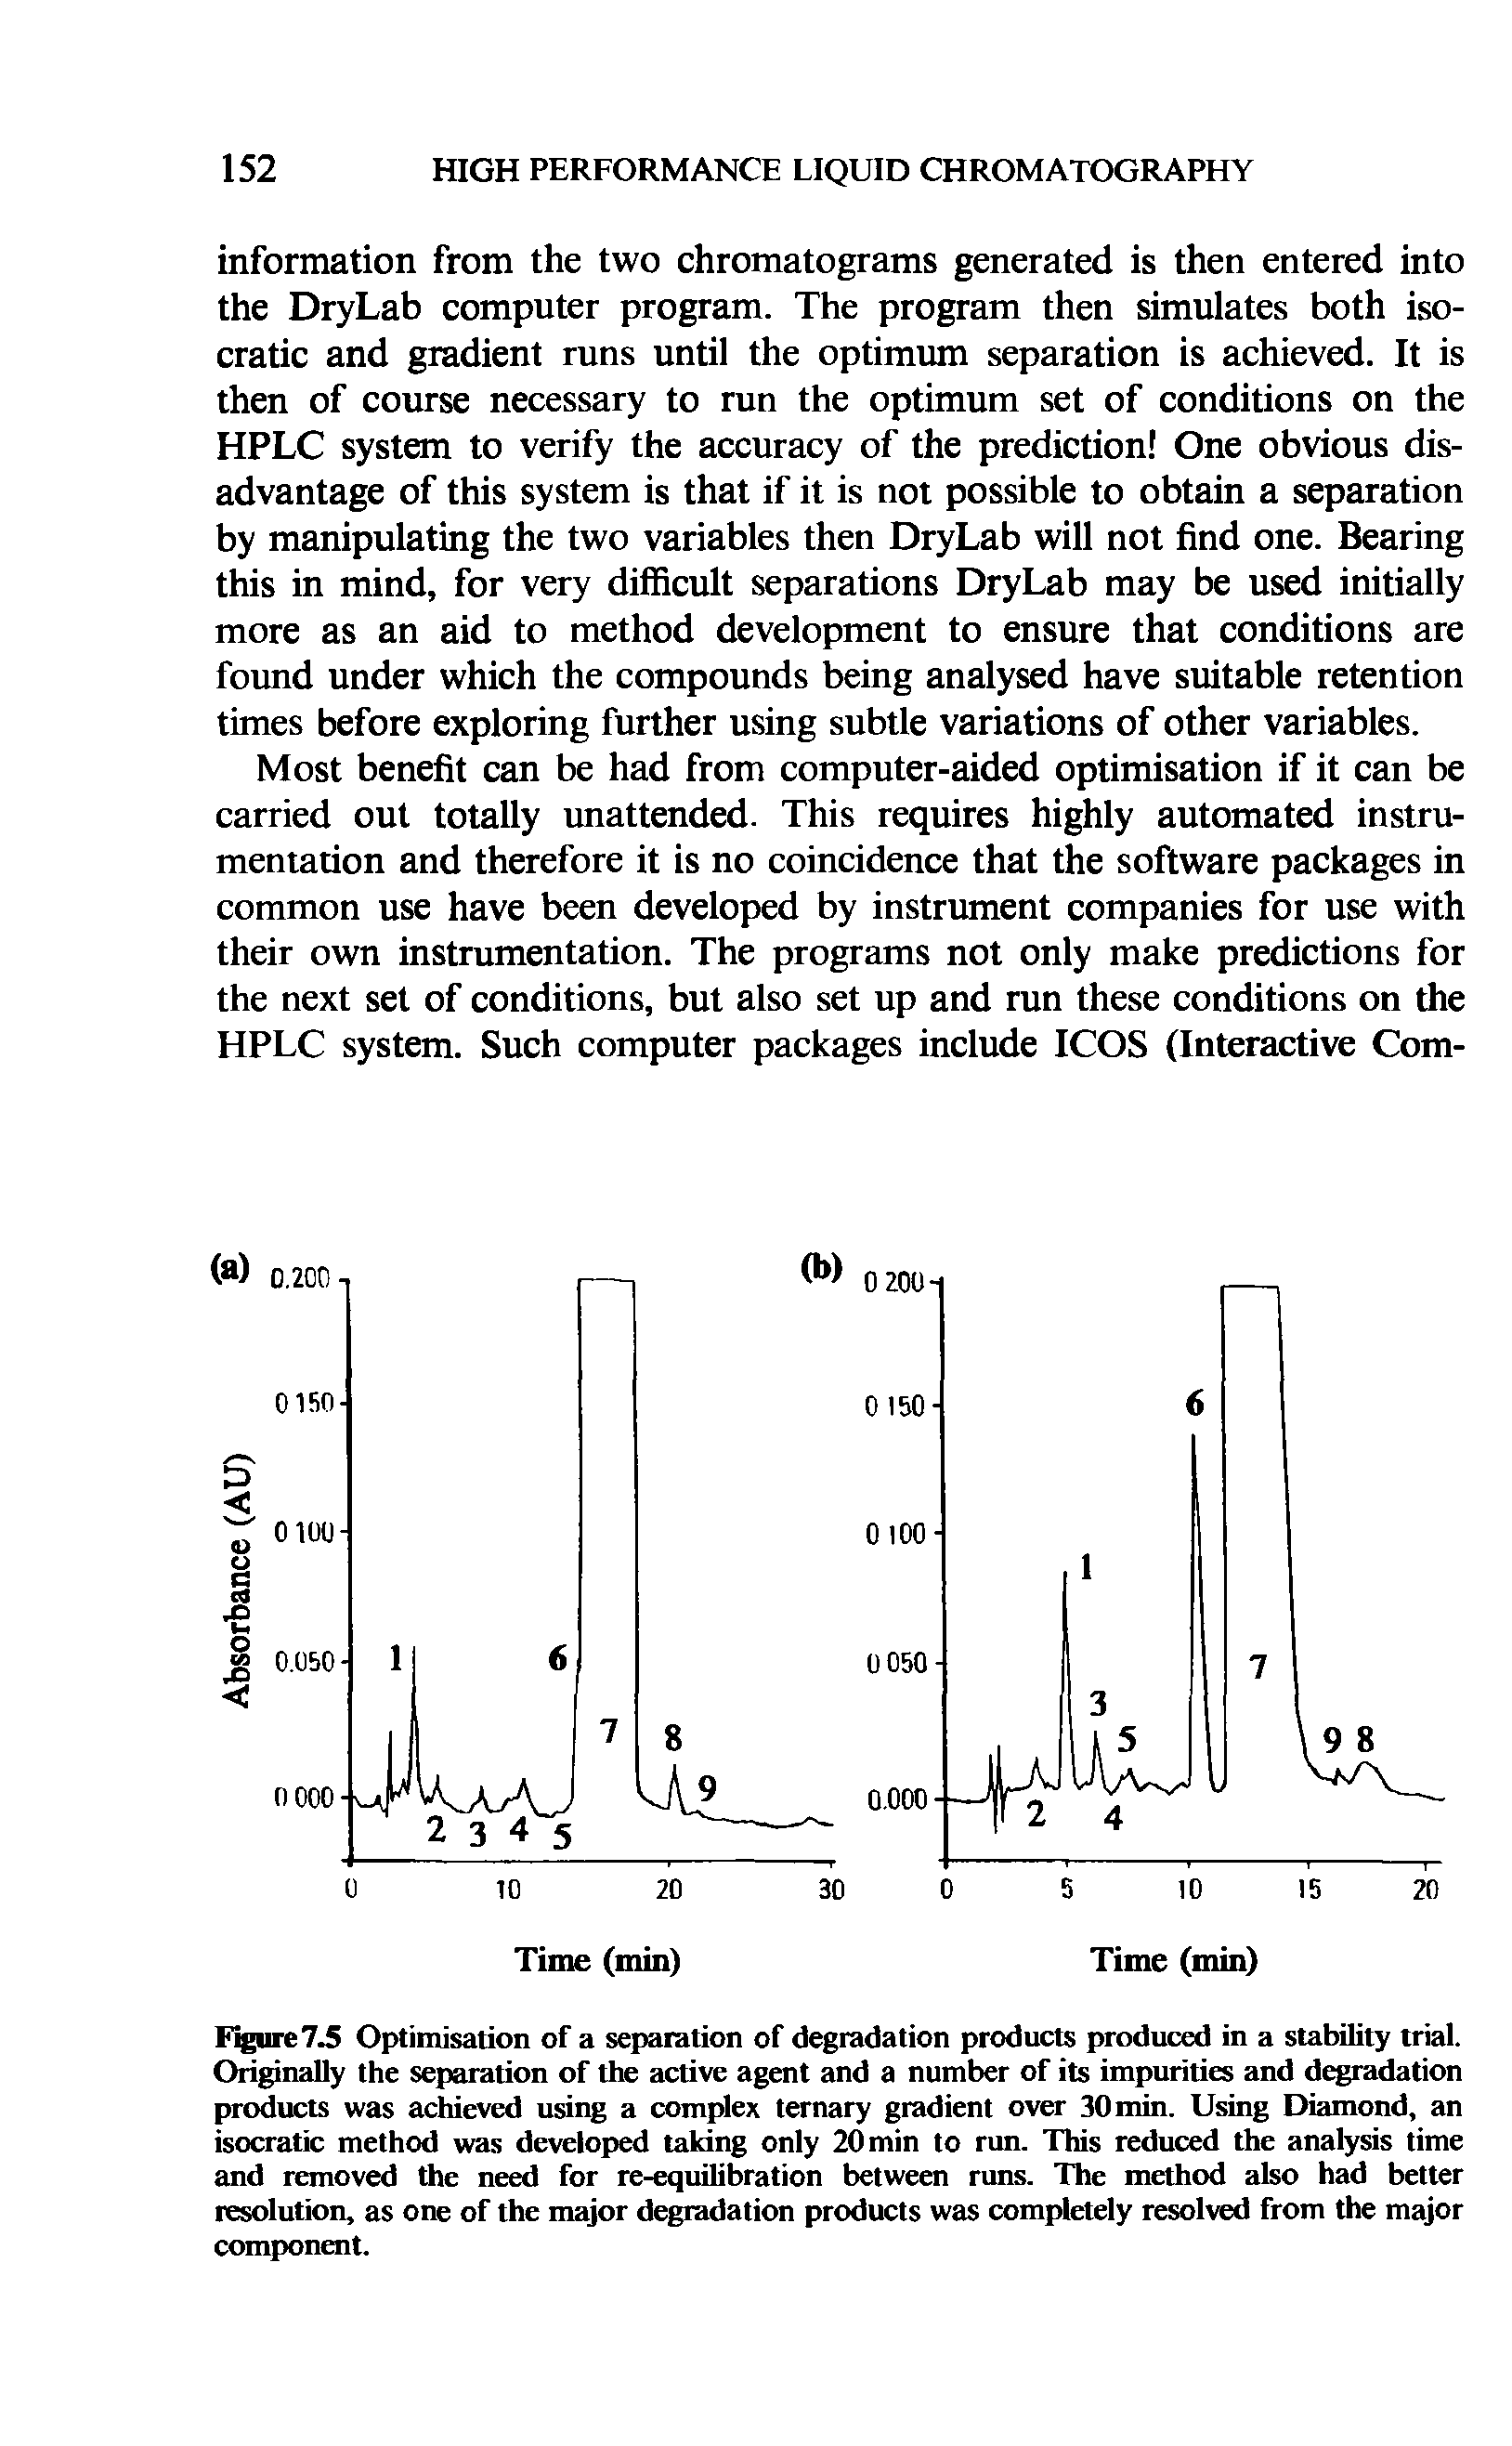 Figure 7.5 Optimisation of a separation of degradation products produced in a stability trial. Originally the separation of the active agent and a number of its impurities and degradation products was achieved using a complex ternary gradient over 30 min. Using Diamond, an isocratic method was developed taking only 20 min to run. This reduced the analysis time and removed the need for re-equilibration between runs. The method also had better resolution, as one of the major degradation products was completely resolved from the major component.